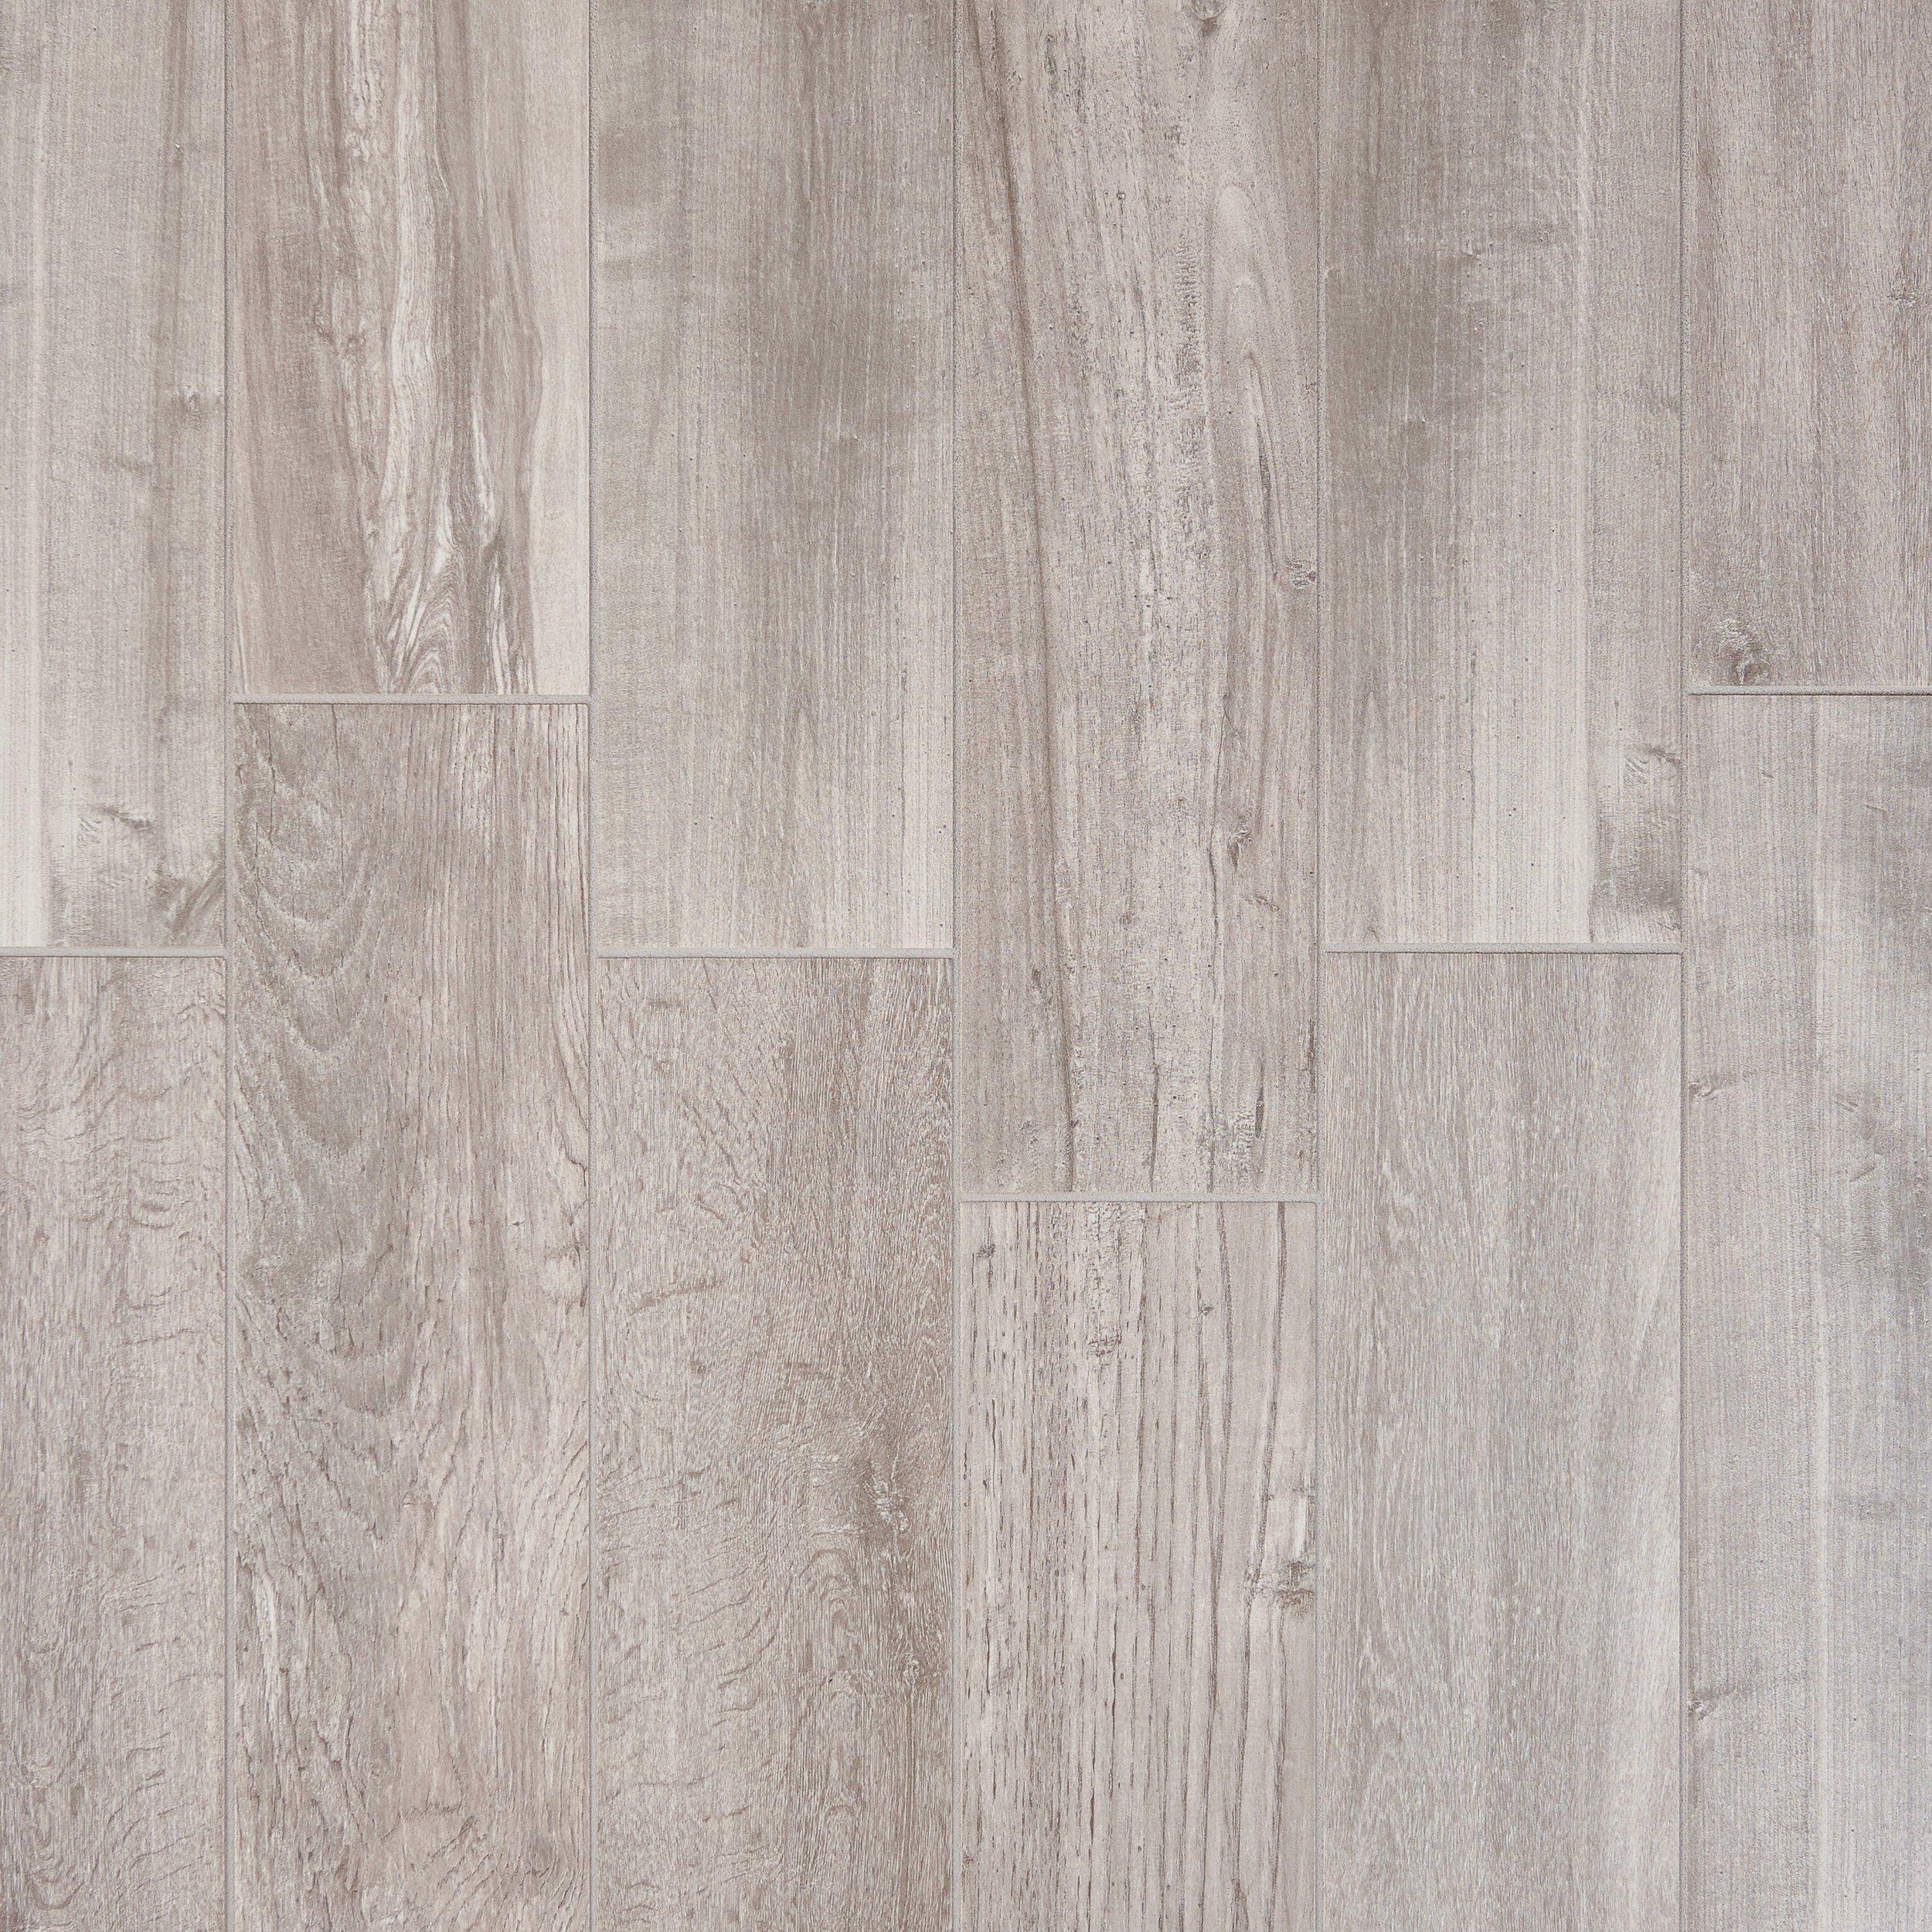 Lumber Gray Wood Plank Porcelain Tile, What Color Grout With Gray Wood Look Tile